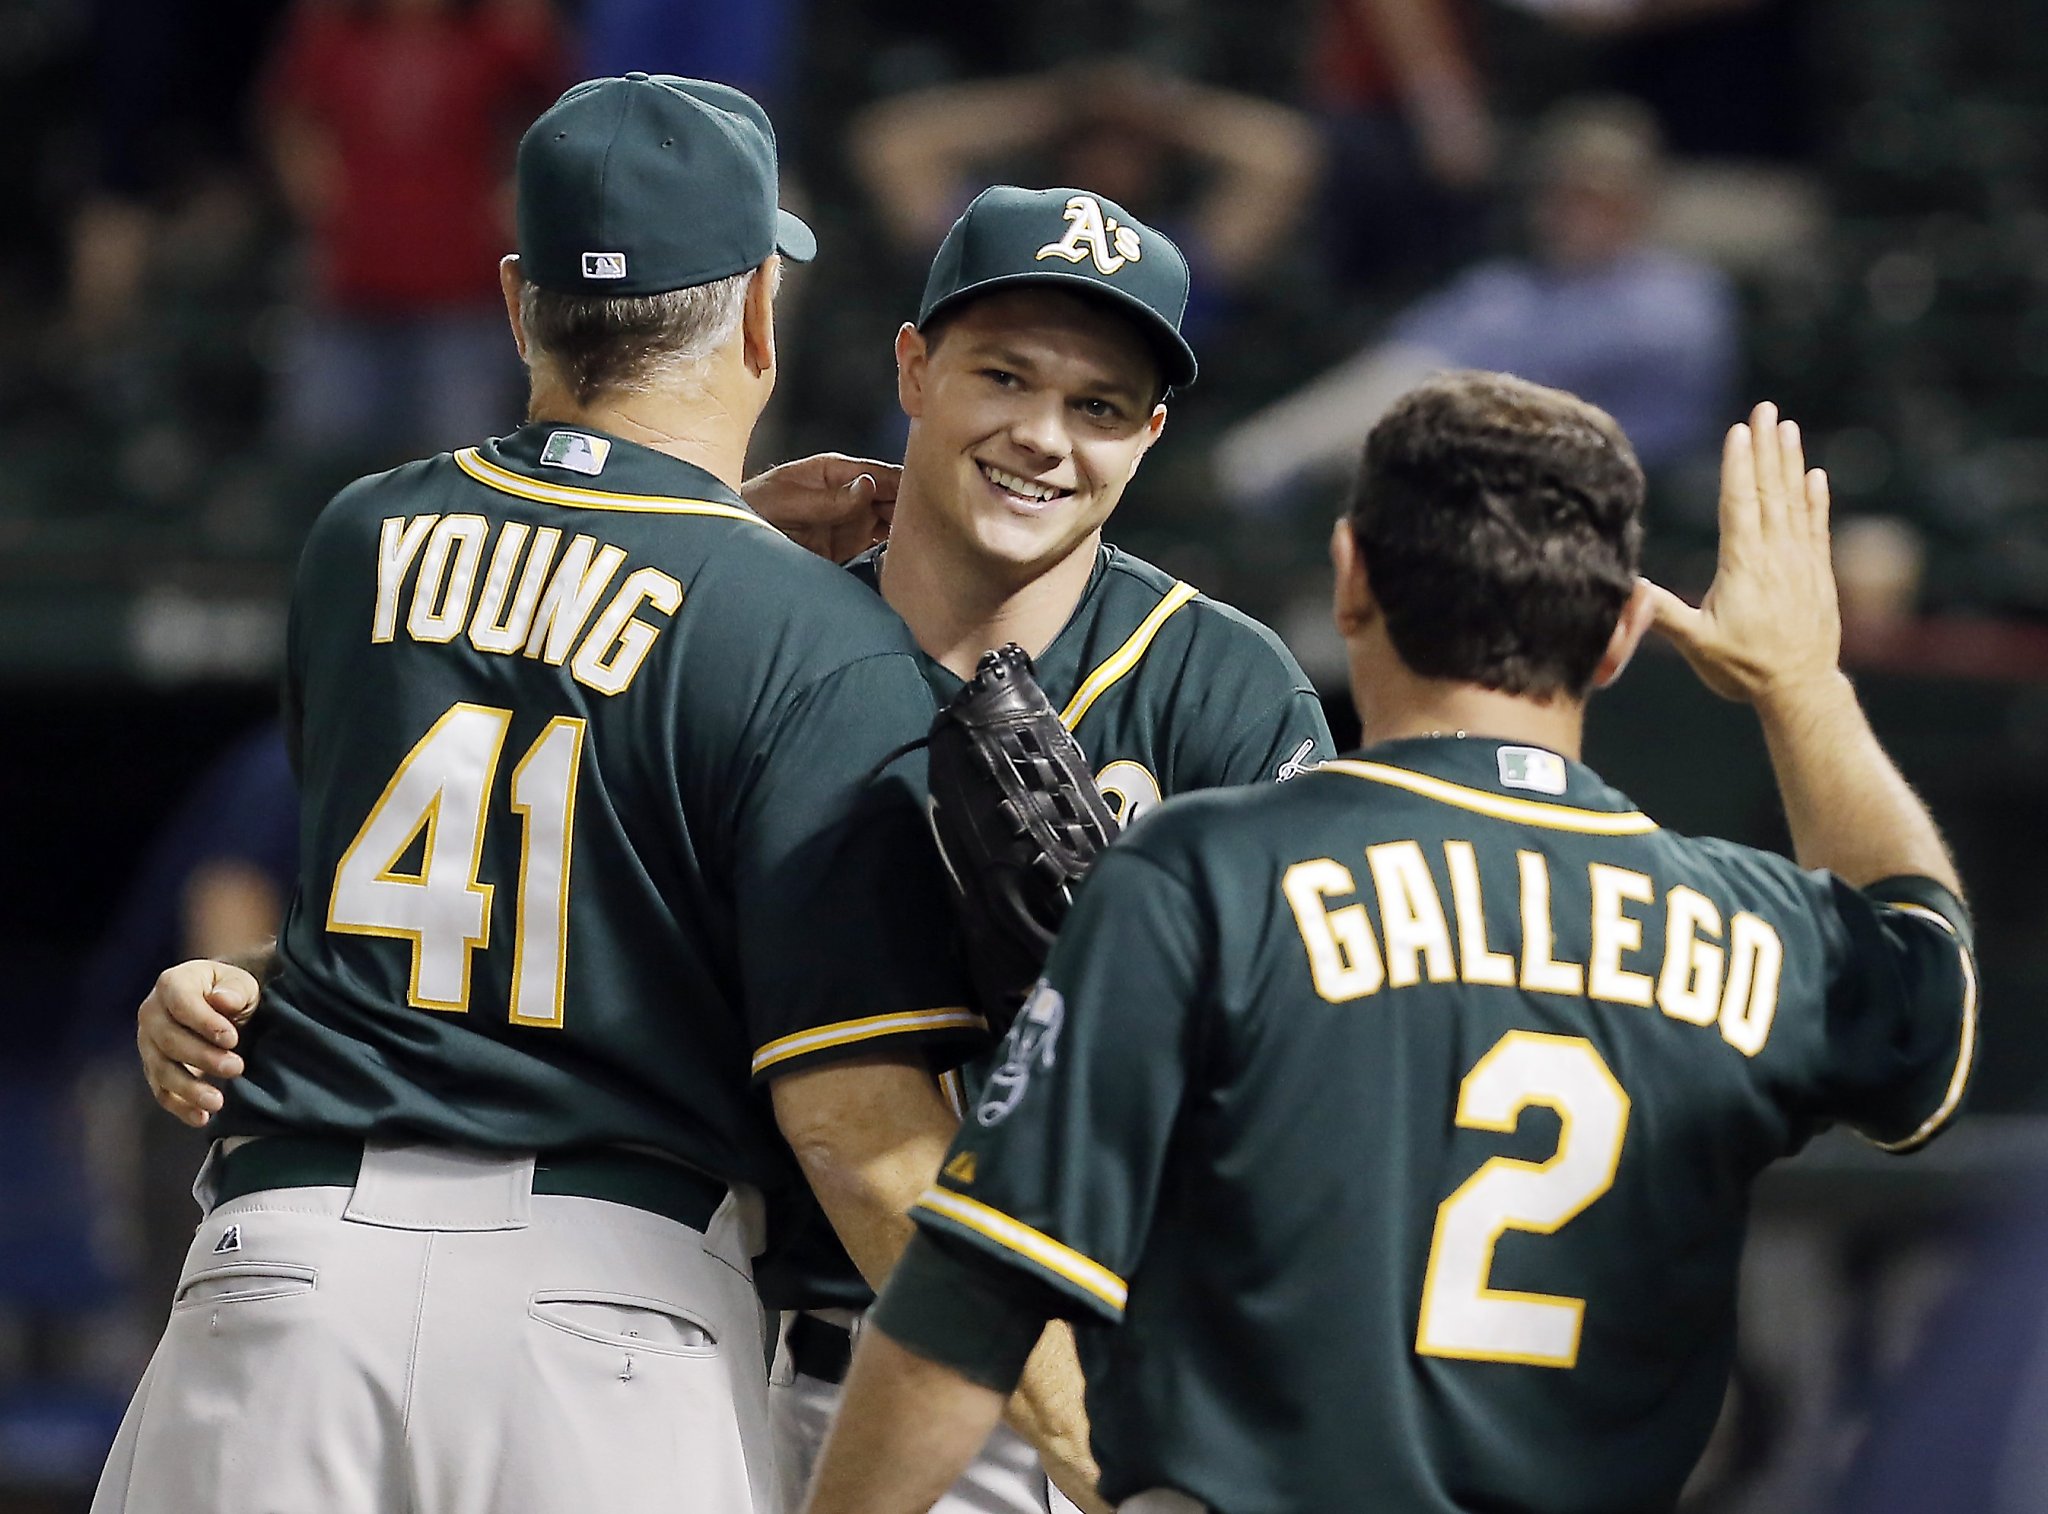 This season, Sonny Gray is trying to grow a mustache  or Sean  Doolittle's beard